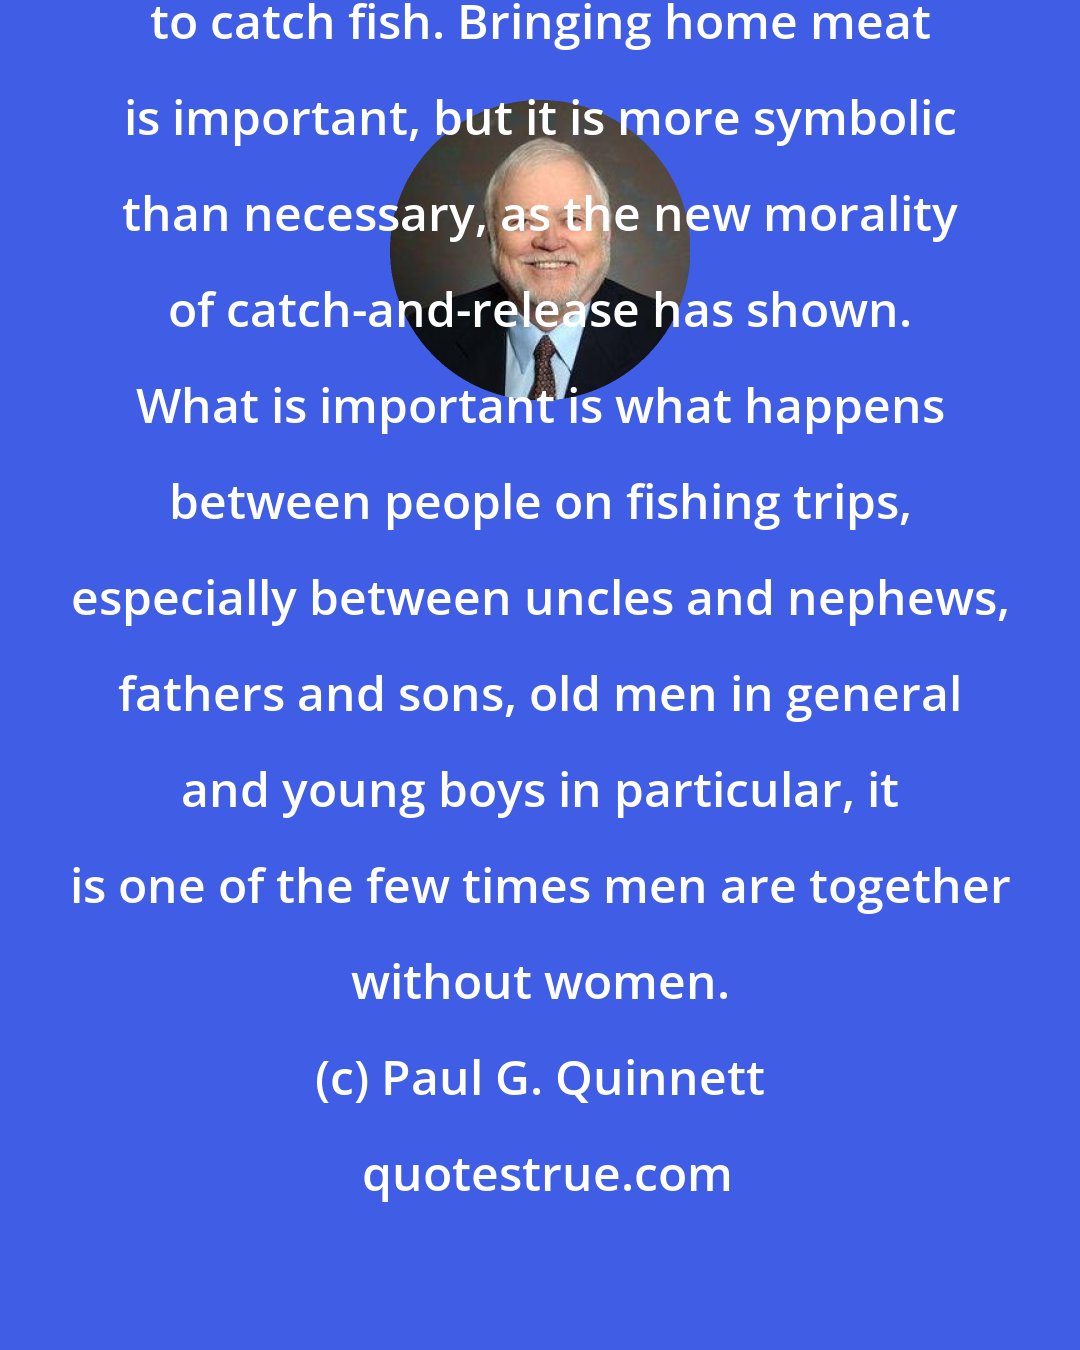 Paul G. Quinnett: The purpose of a fishing trip is not to catch fish. Bringing home meat is important, but it is more symbolic than necessary, as the new morality of catch-and-release has shown. What is important is what happens between people on fishing trips, especially between uncles and nephews, fathers and sons, old men in general and young boys in particular, it is one of the few times men are together without women.